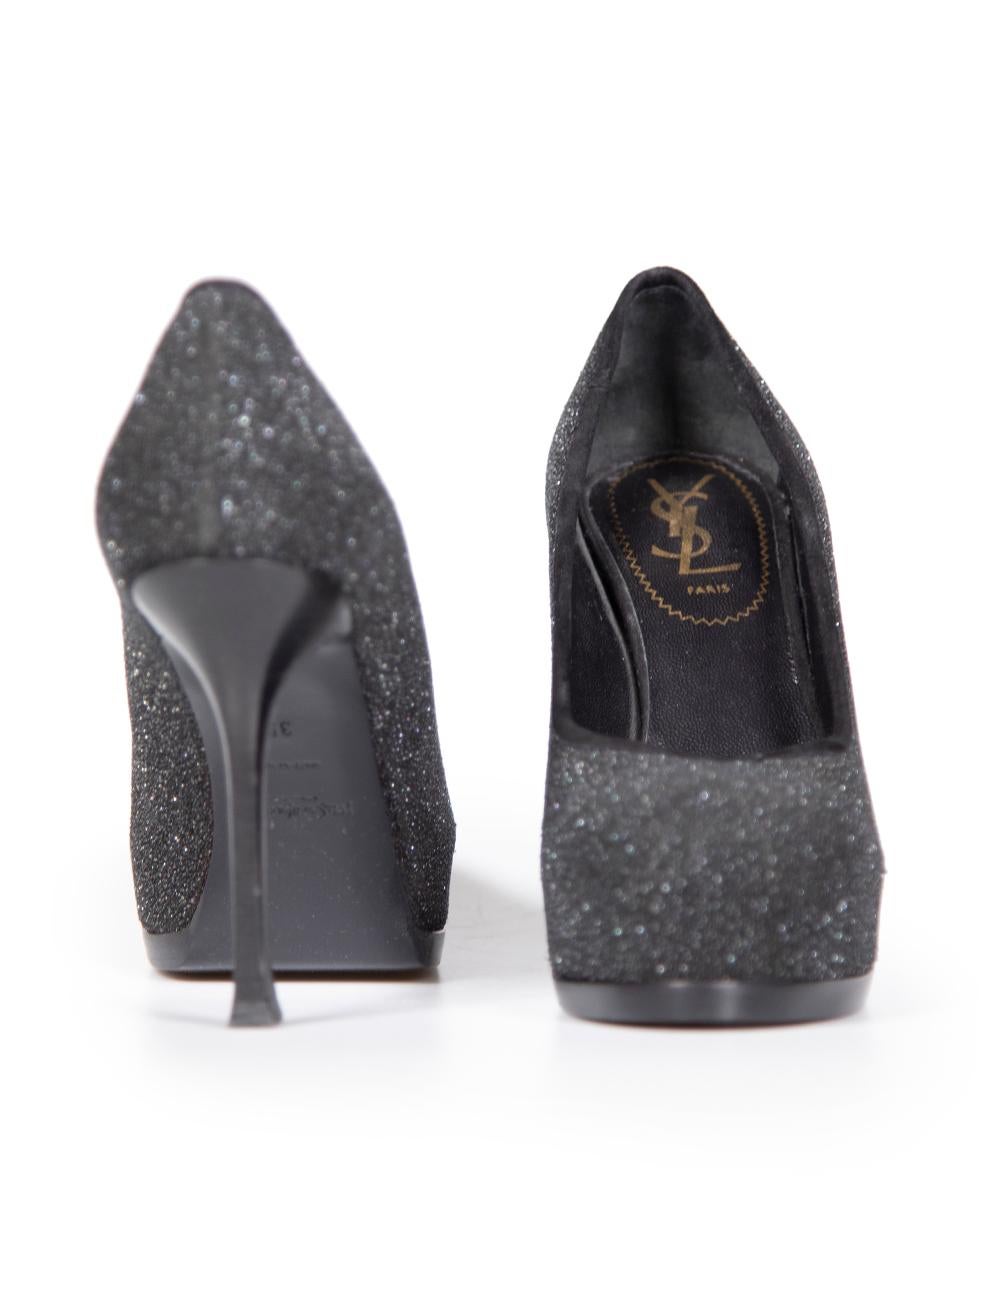 Saint Laurent Black Textured Glitter Pumps Size IT 35 In Good Condition For Sale In London, GB